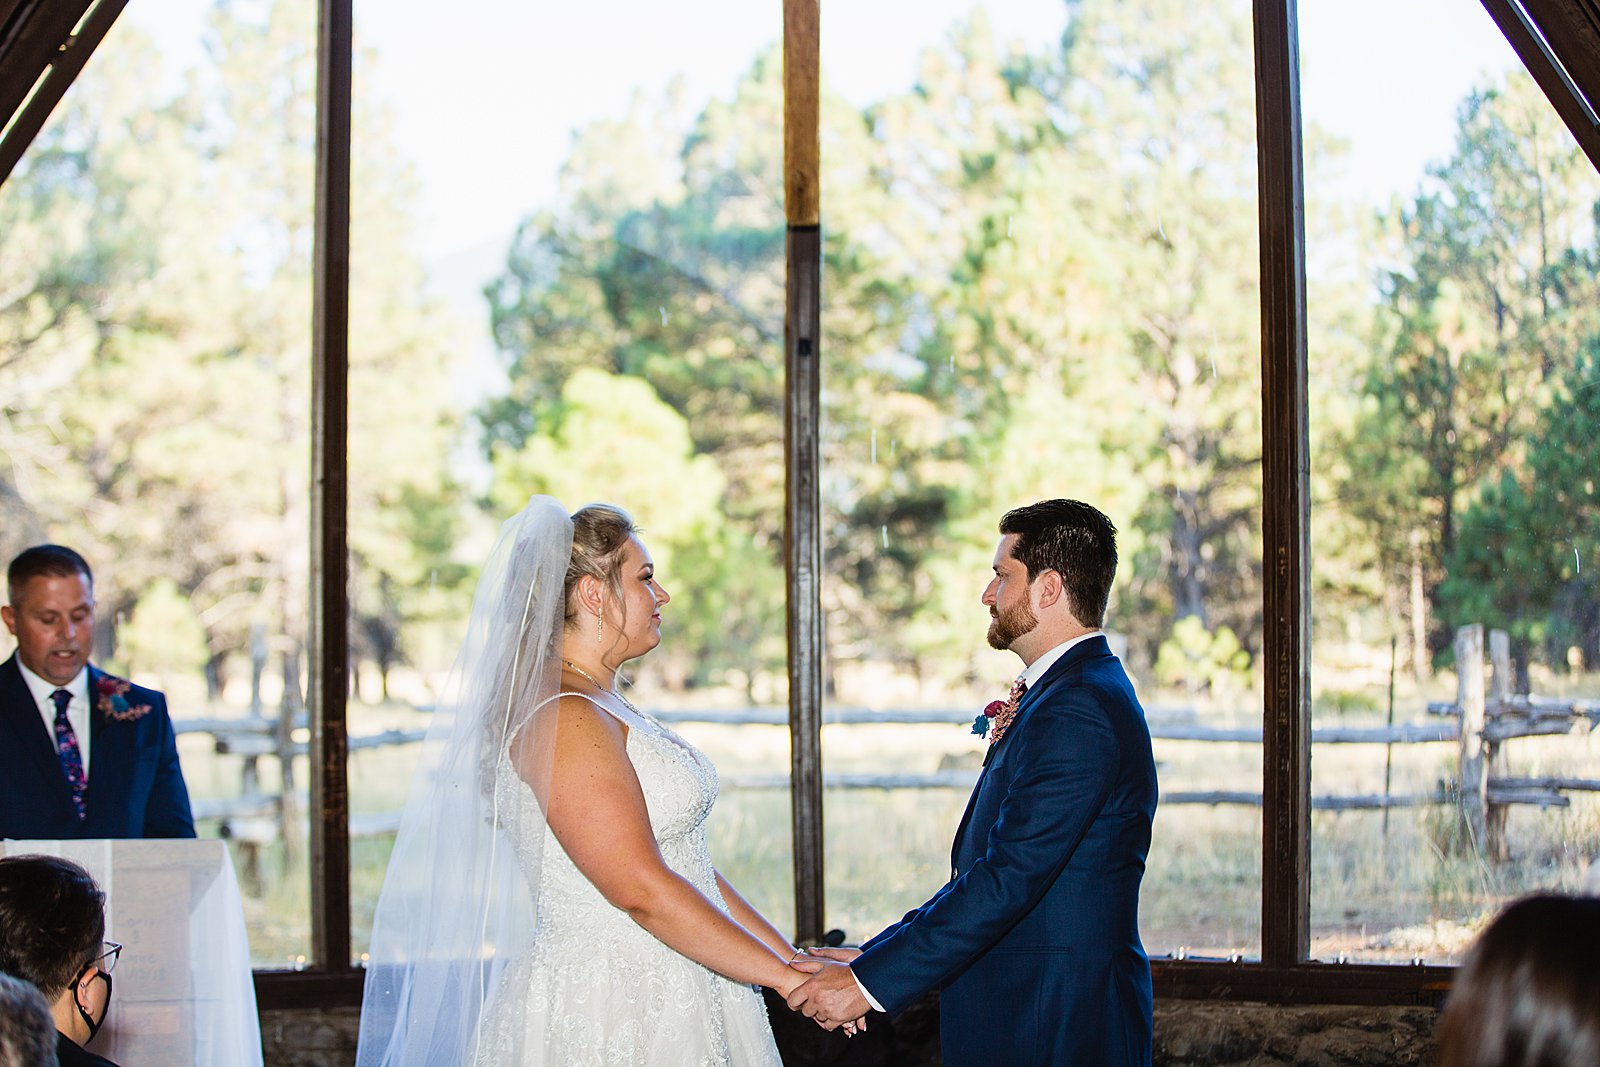 Bride and Groom togethering during Chapel of the Holy Dove wedding ceremony by Flagstaff wedding photographer PMA Photography.